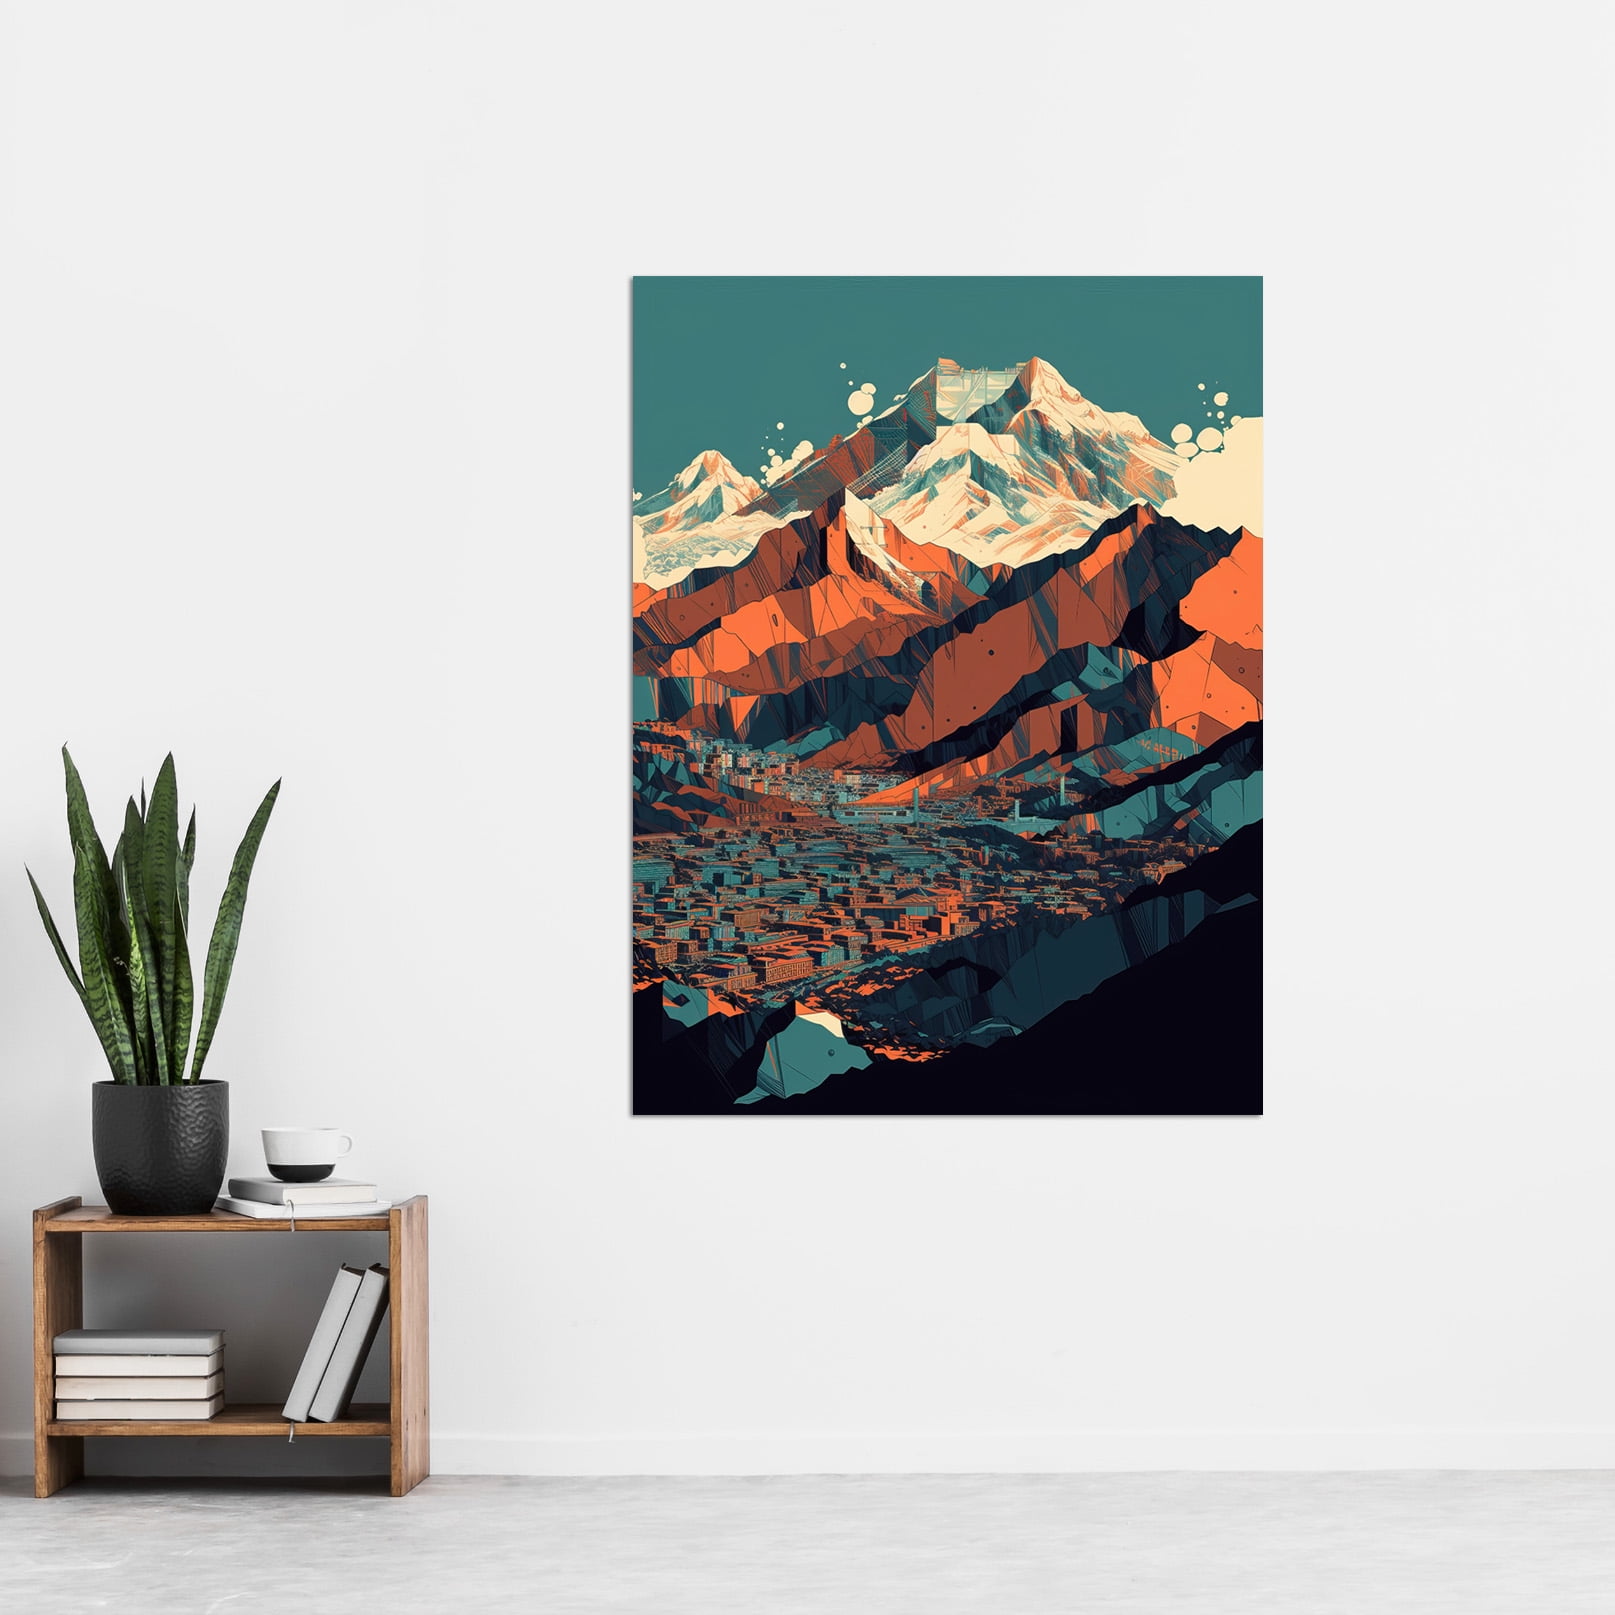 Modern City Surrounded by Tall Mountains Landscape Large Wall Art Poster  Print Thick Paper 18X24 Inch